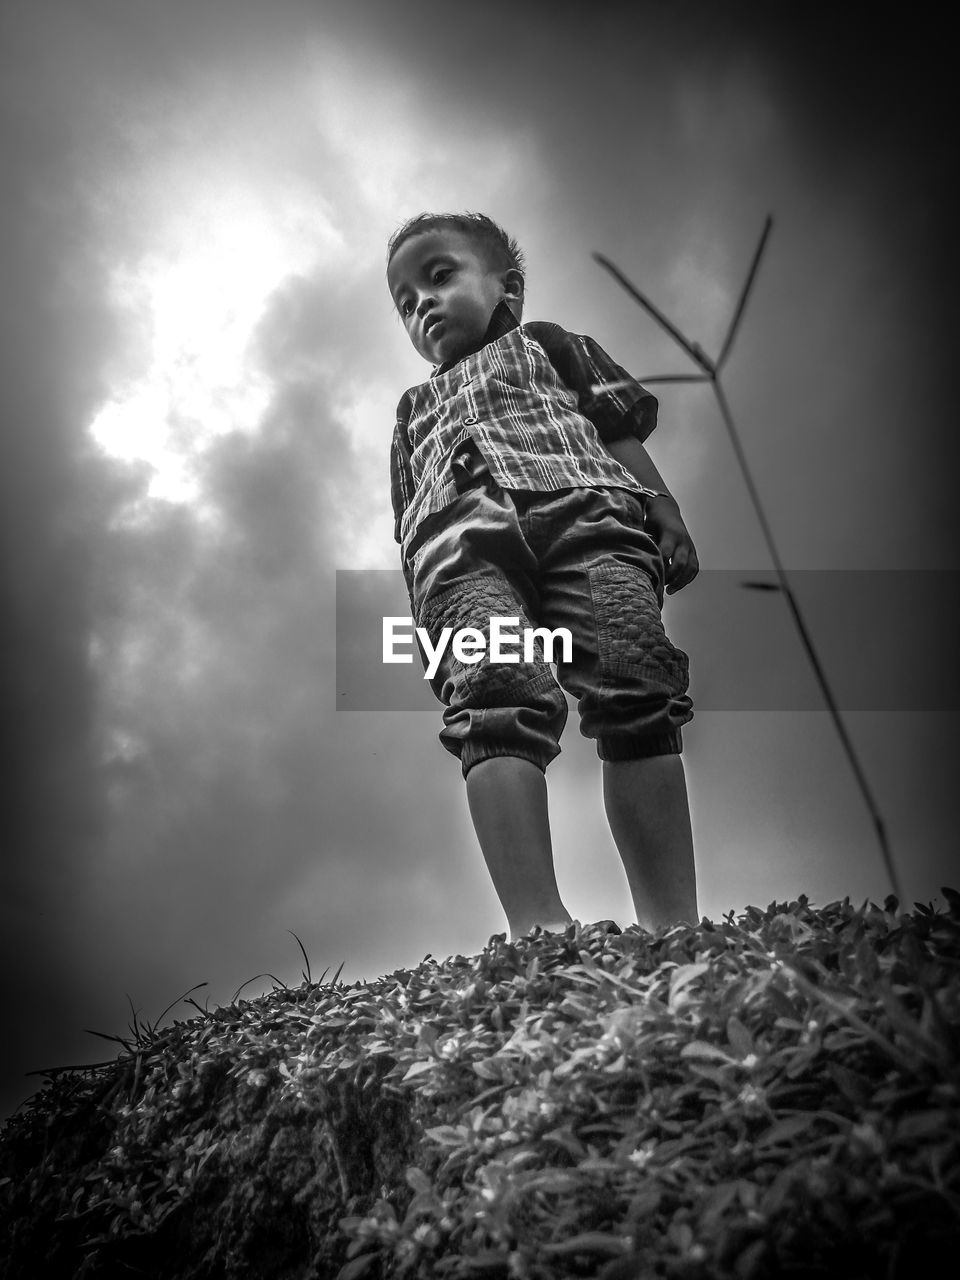 LOW ANGLE VIEW OF BOY AGAINST CLOUDY SKY